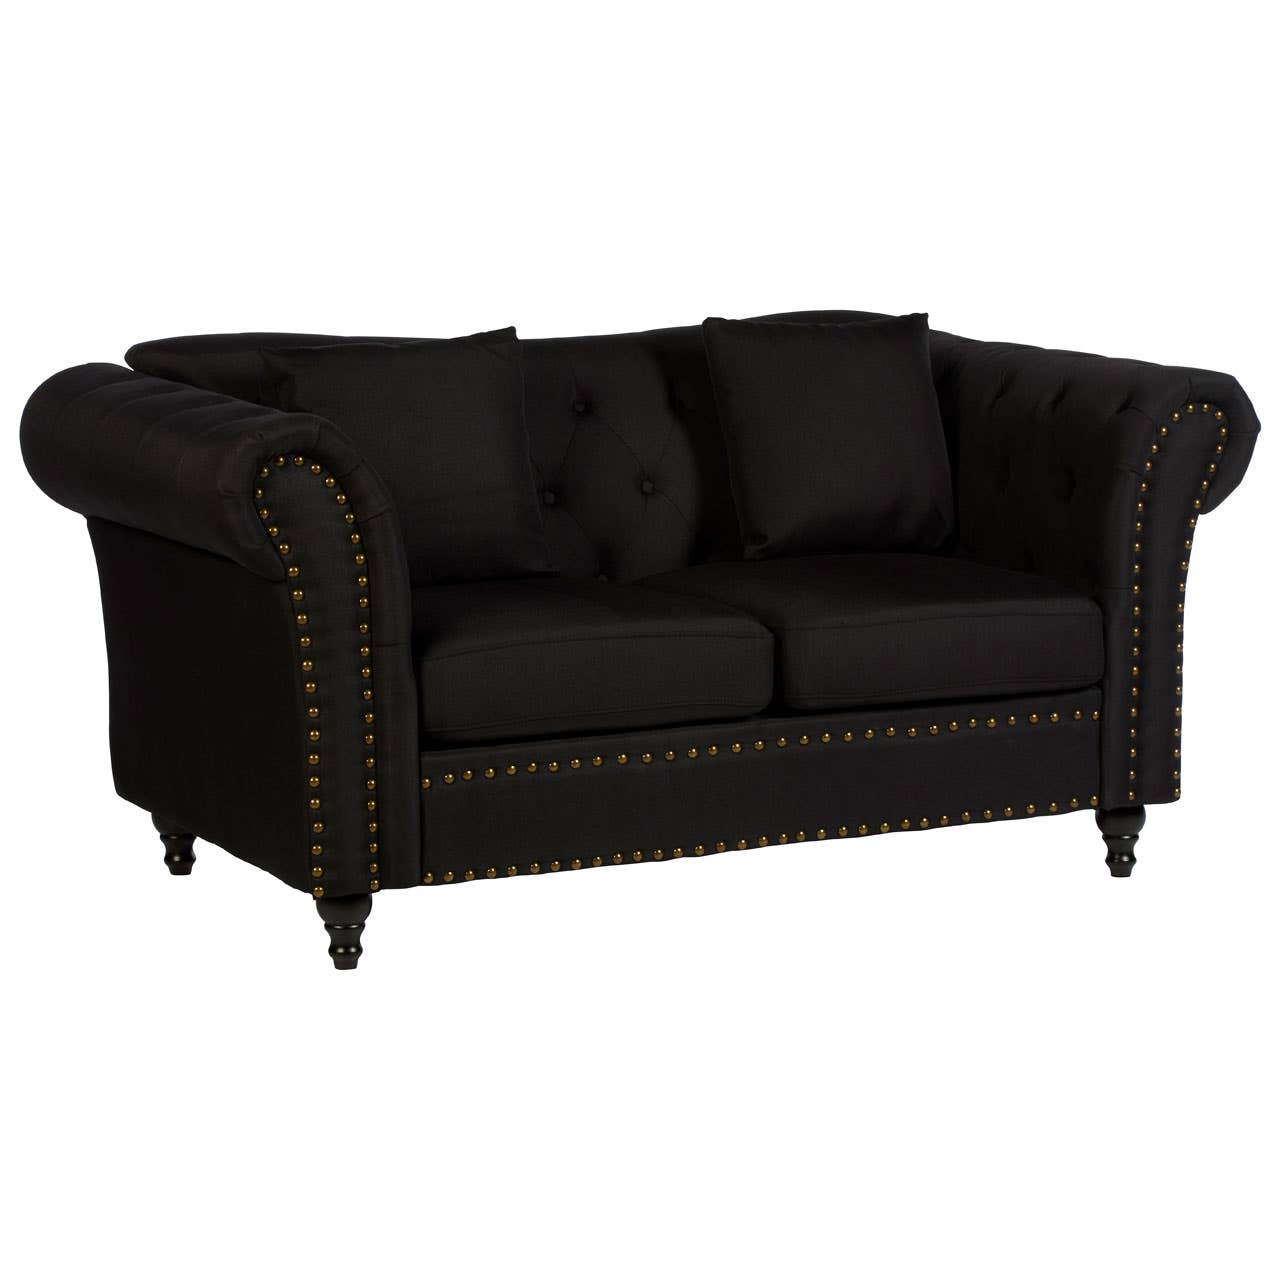 Fable 2 Seat Black Chesterfield Sofa